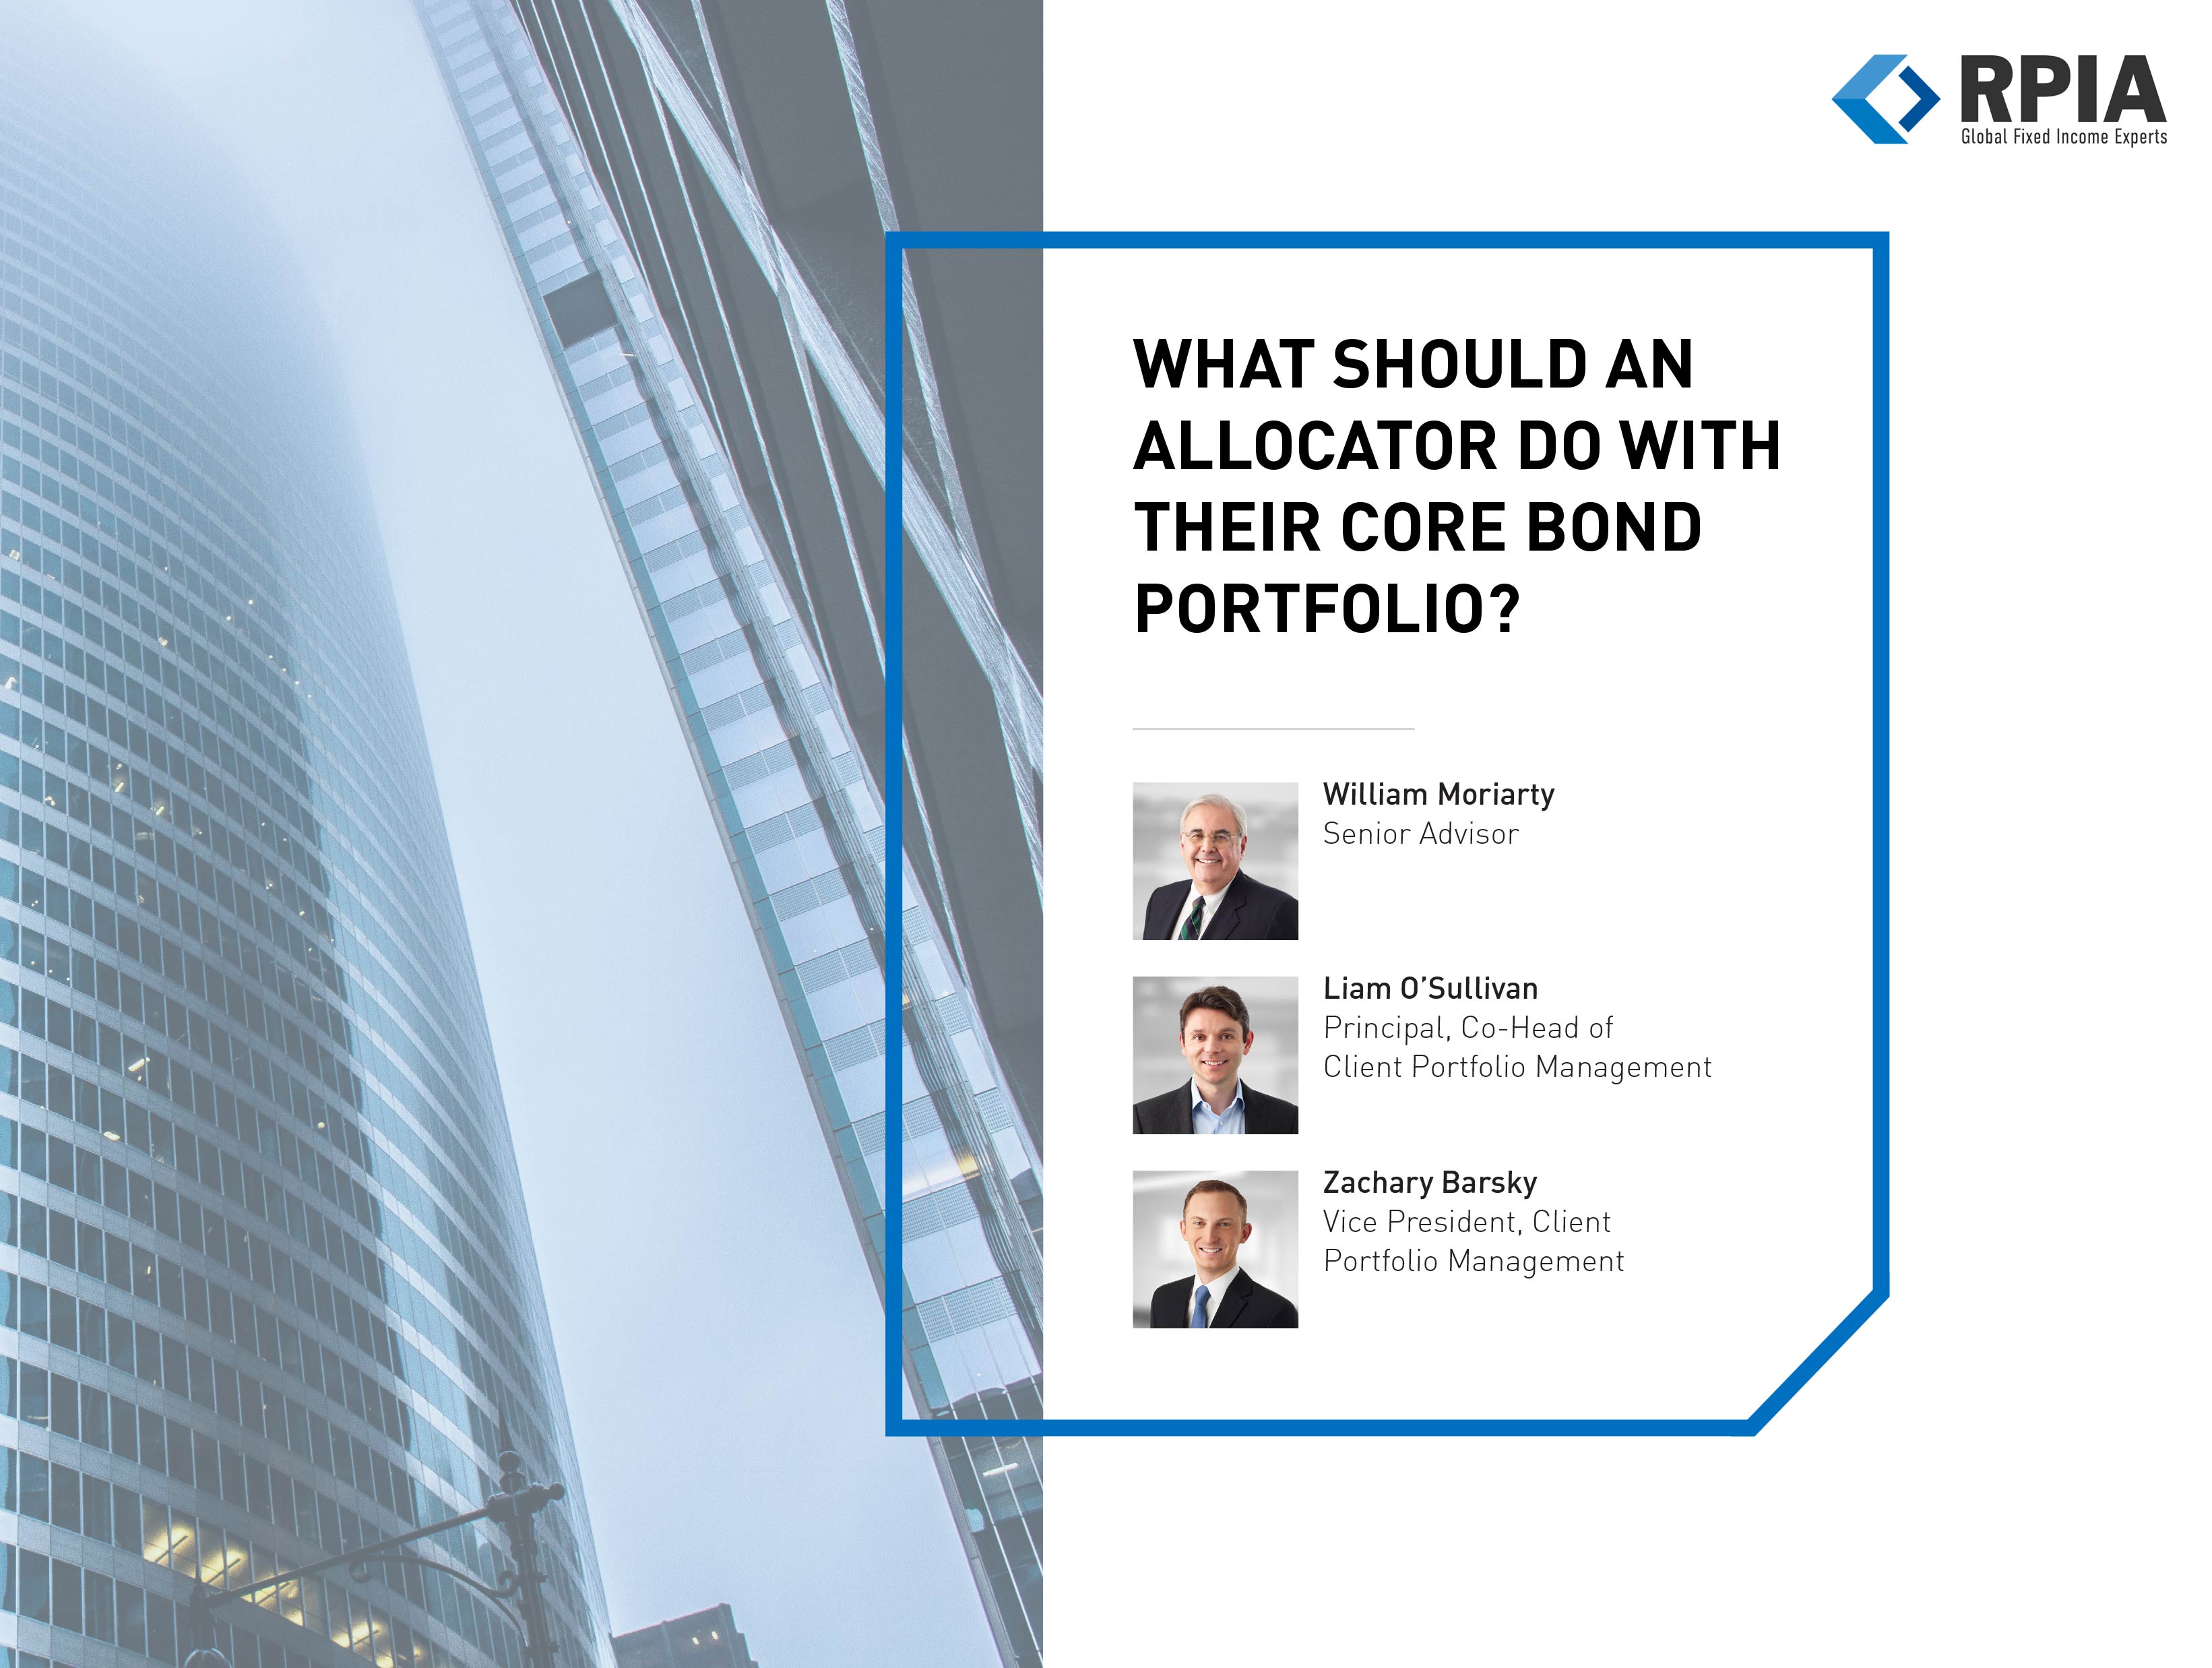 What Should an Allocator Do with their core bond portfolio?